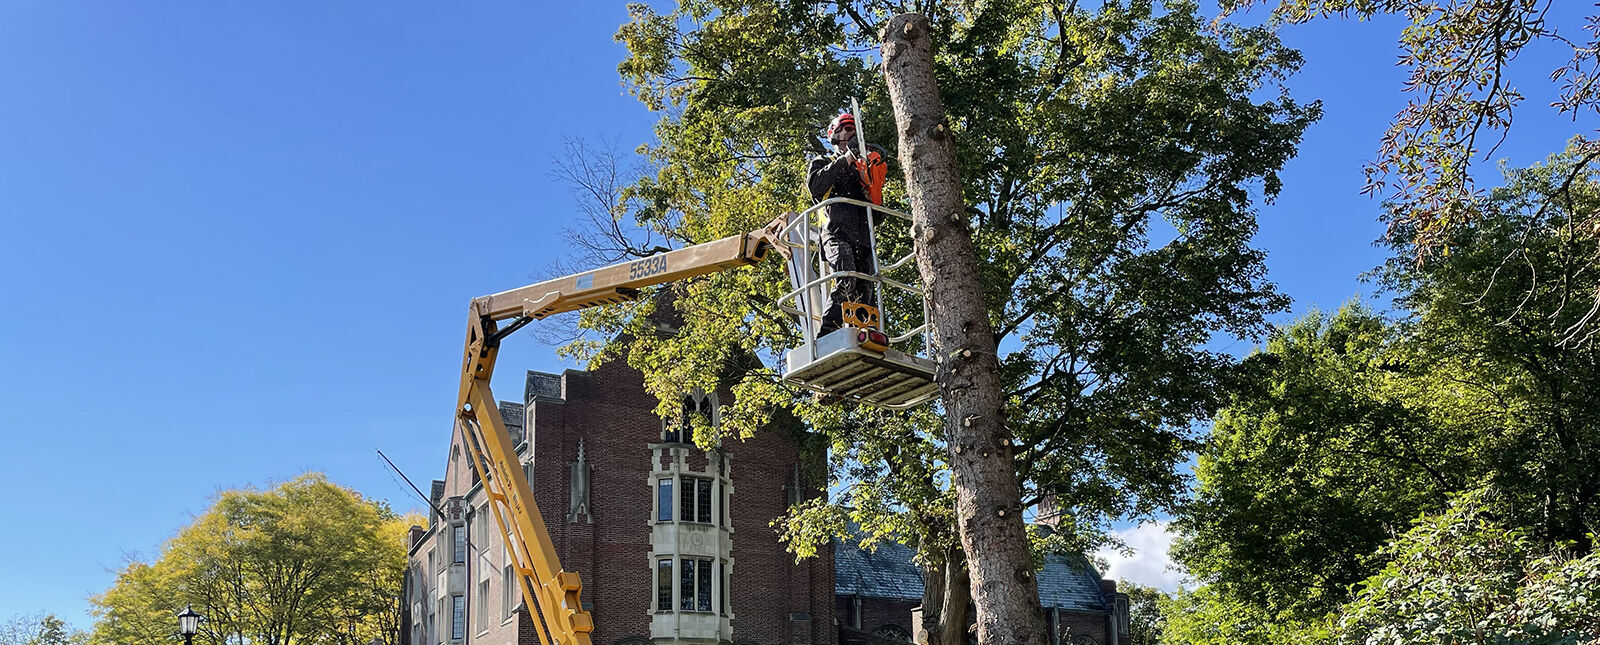 A worker on a crane arm cuts down a tree by Hamilton Hall